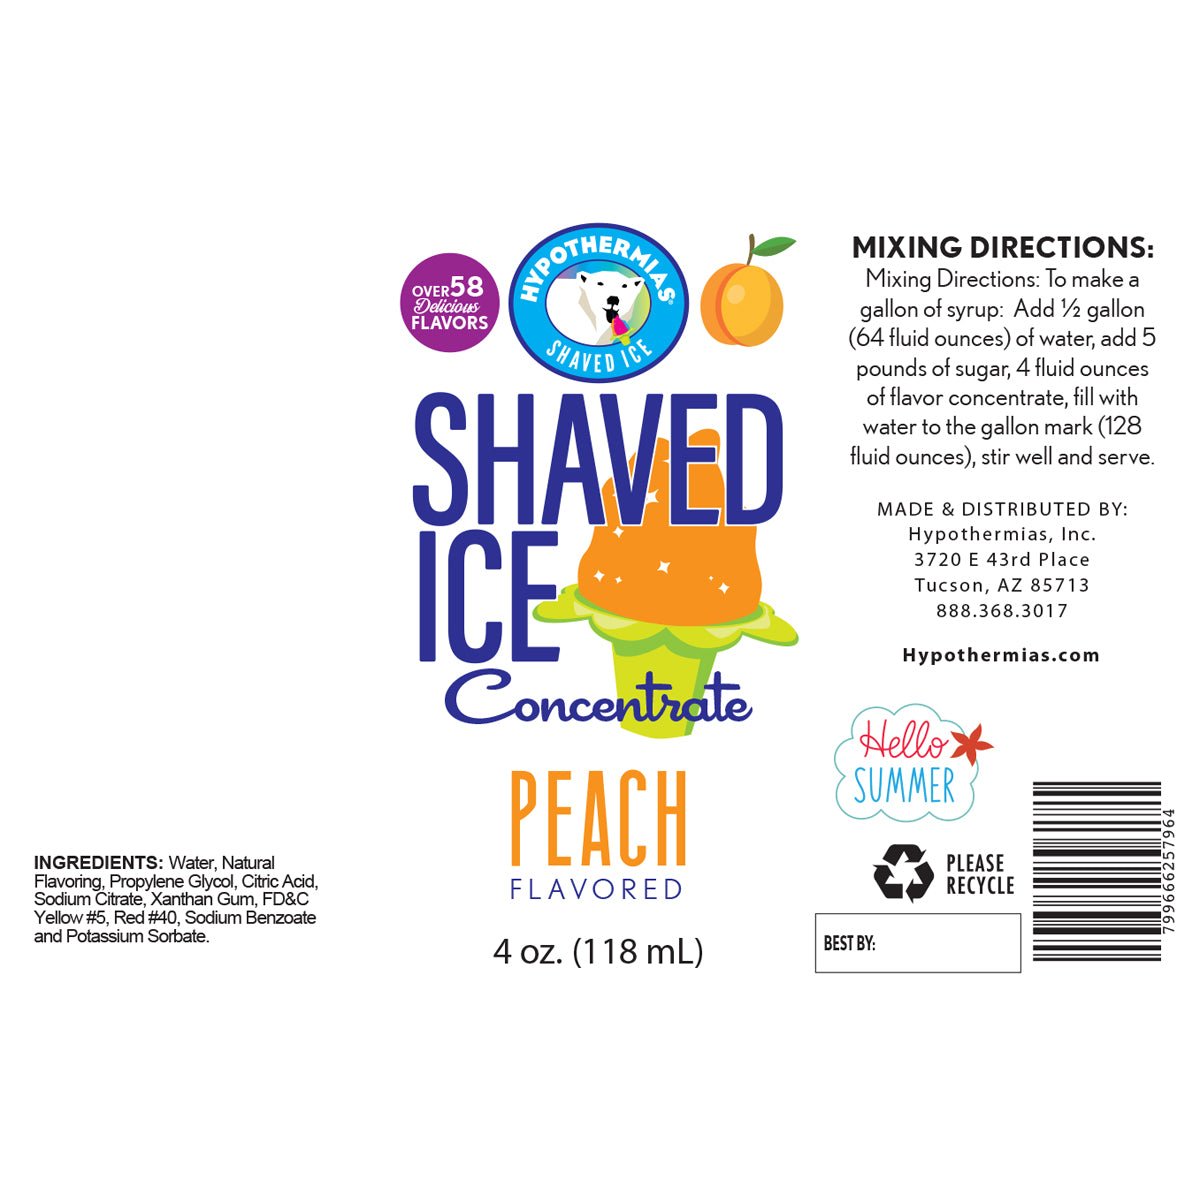 Hypothermias peach shaved ice or snow cone flavor syrup concentrate ingredient label.